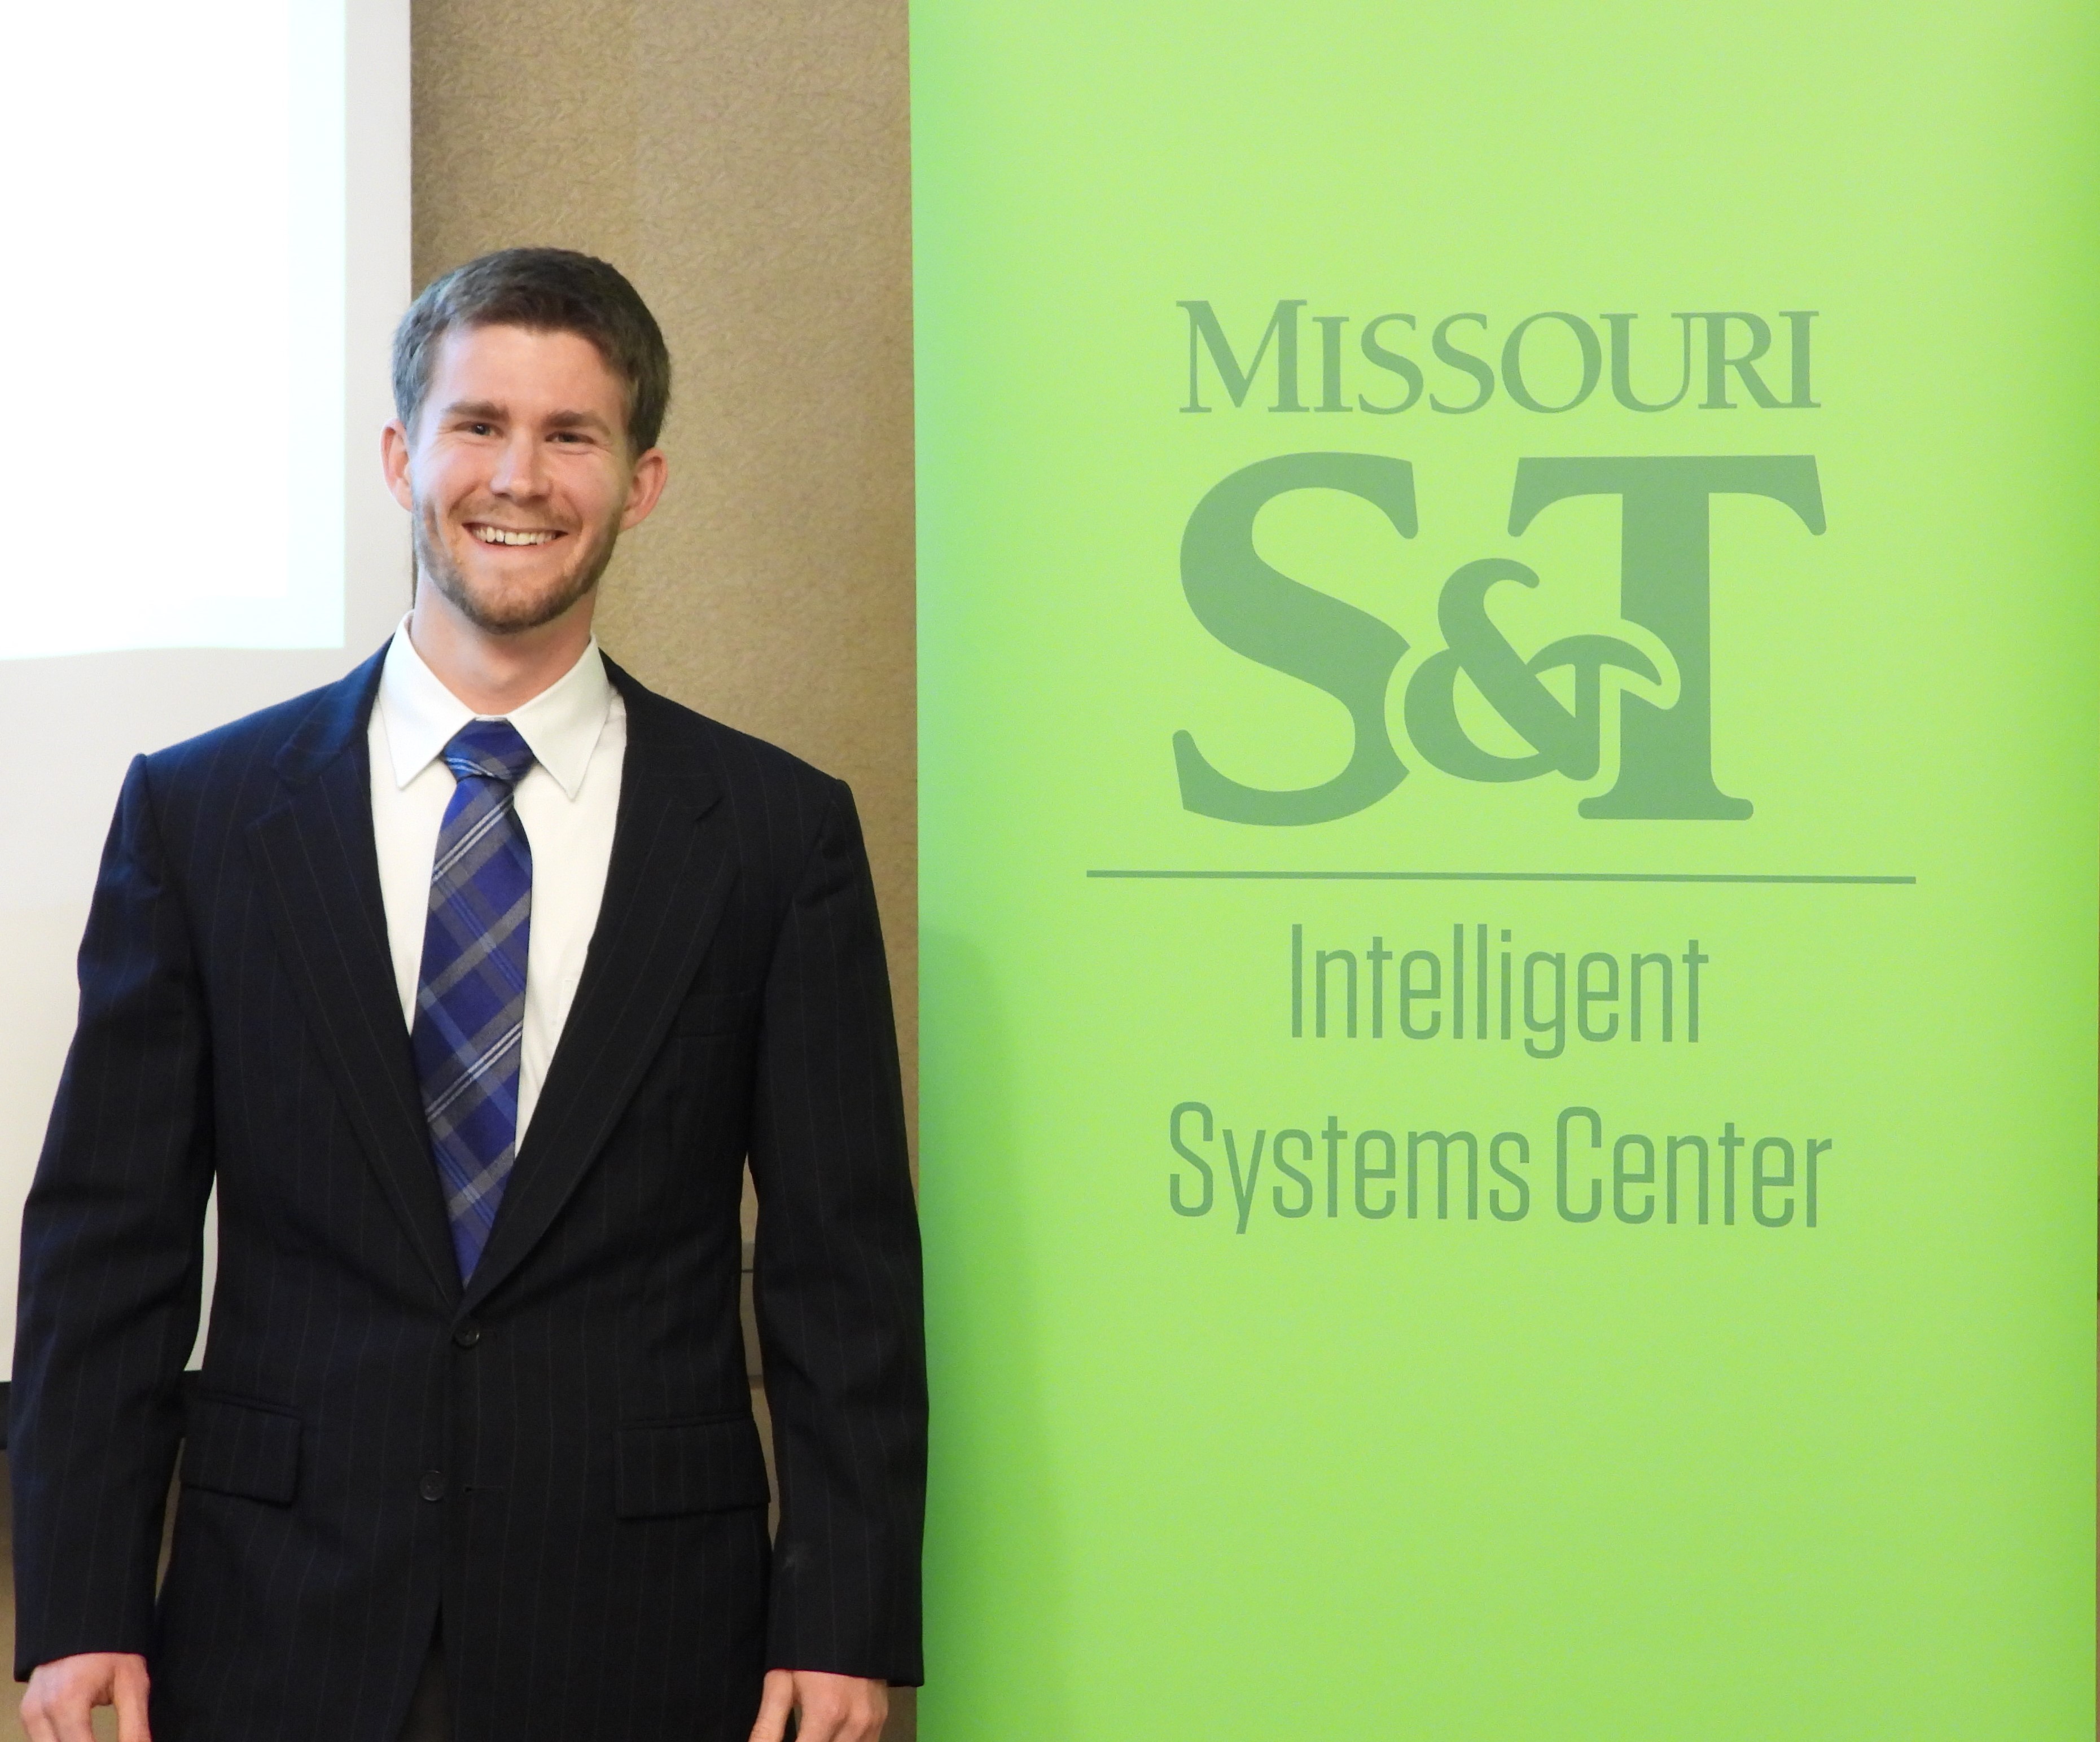 First place winner, Jonathan Kelley, smiling next to Intelligent Systems Center banner.